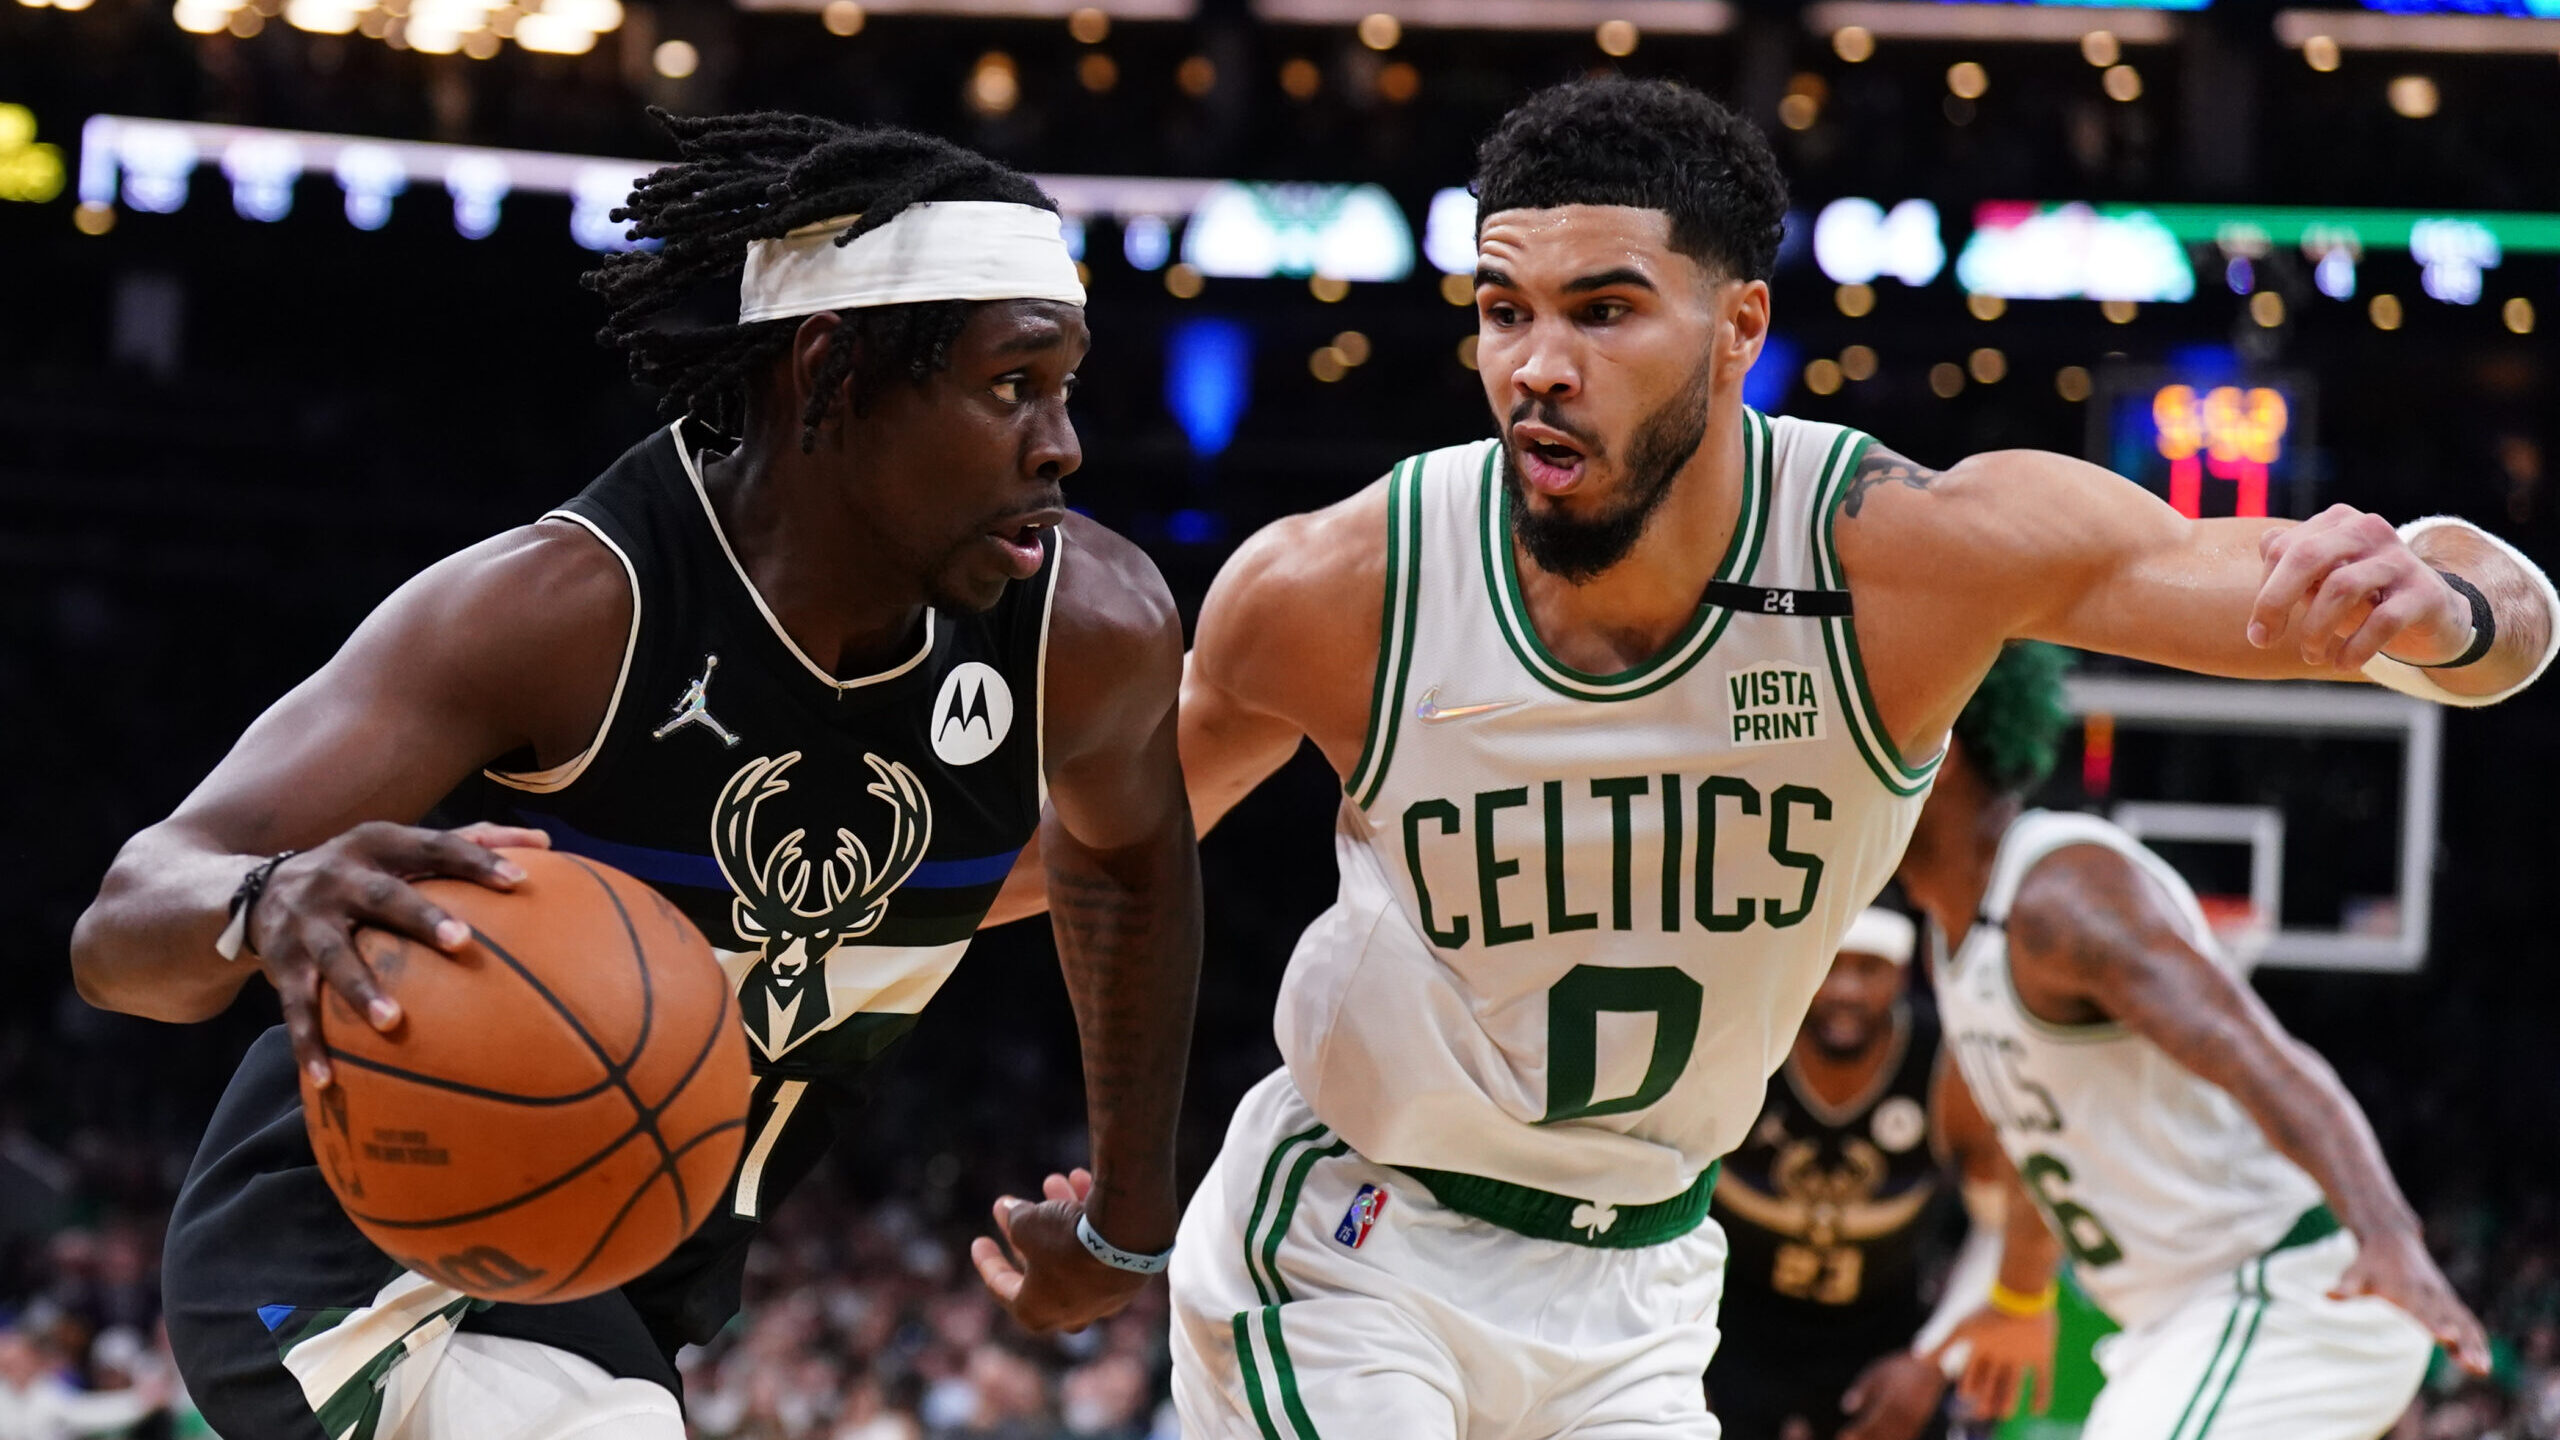 A Look at the Pros and Cons of the Holiday-Celtics Trade